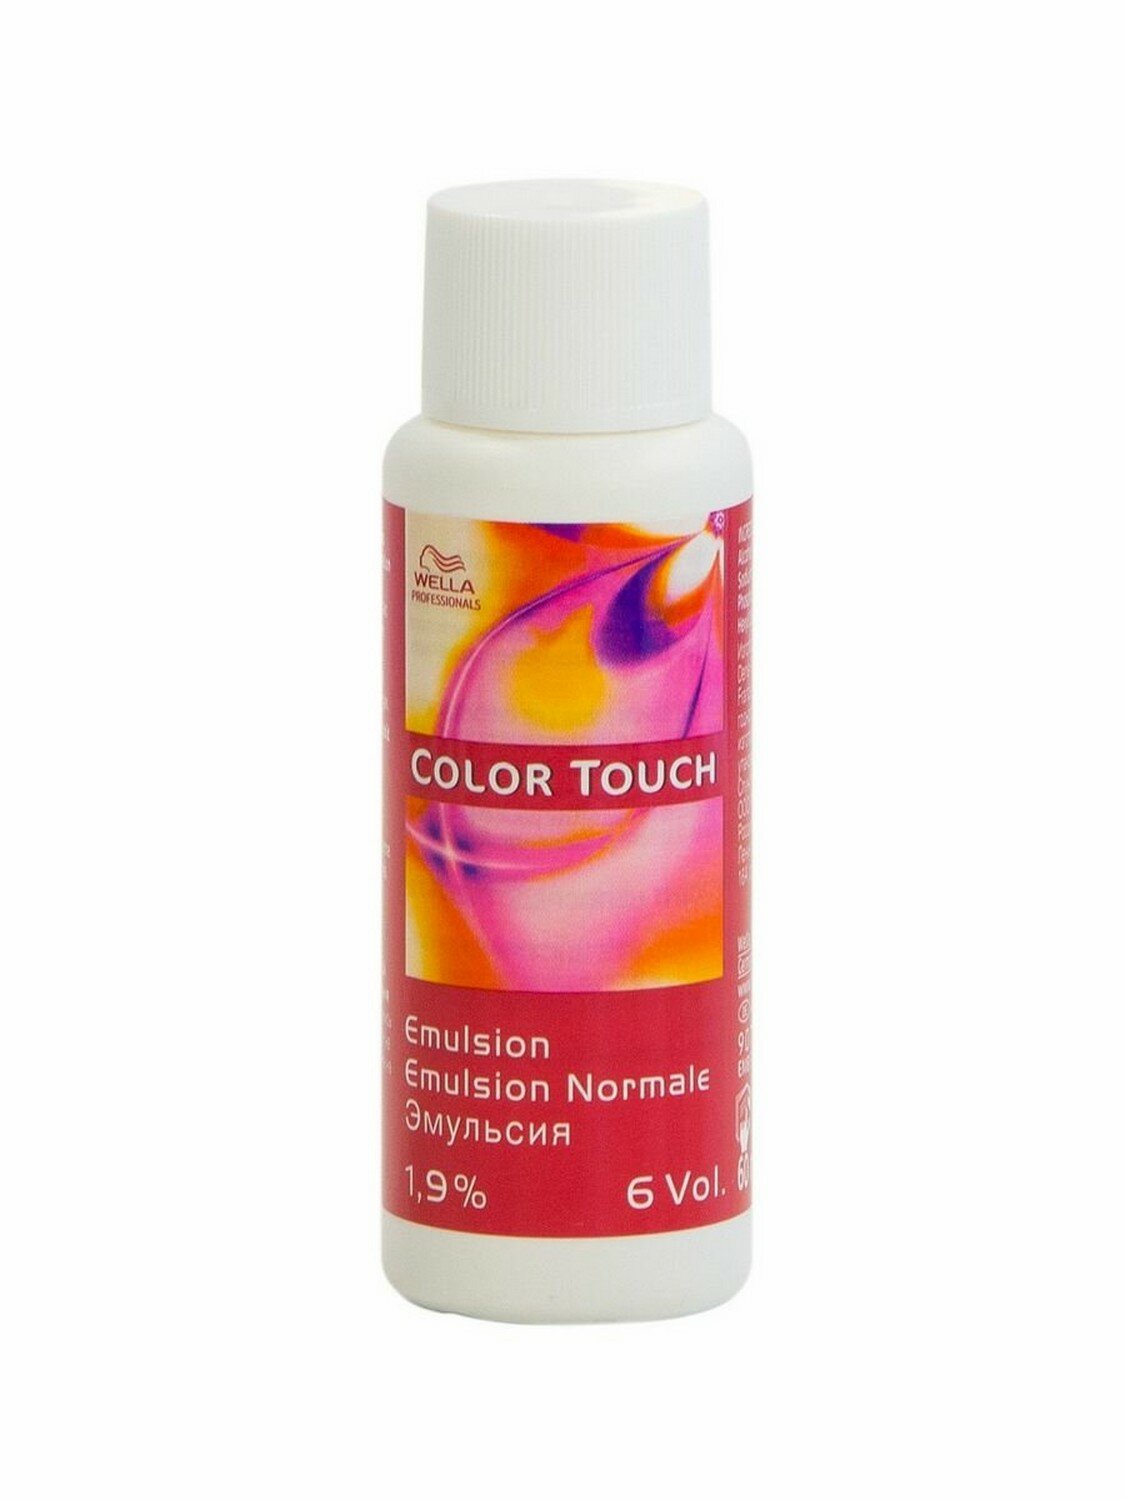 Wella Professionals Эмульсия Color Touch, 1.9%, 60 мл